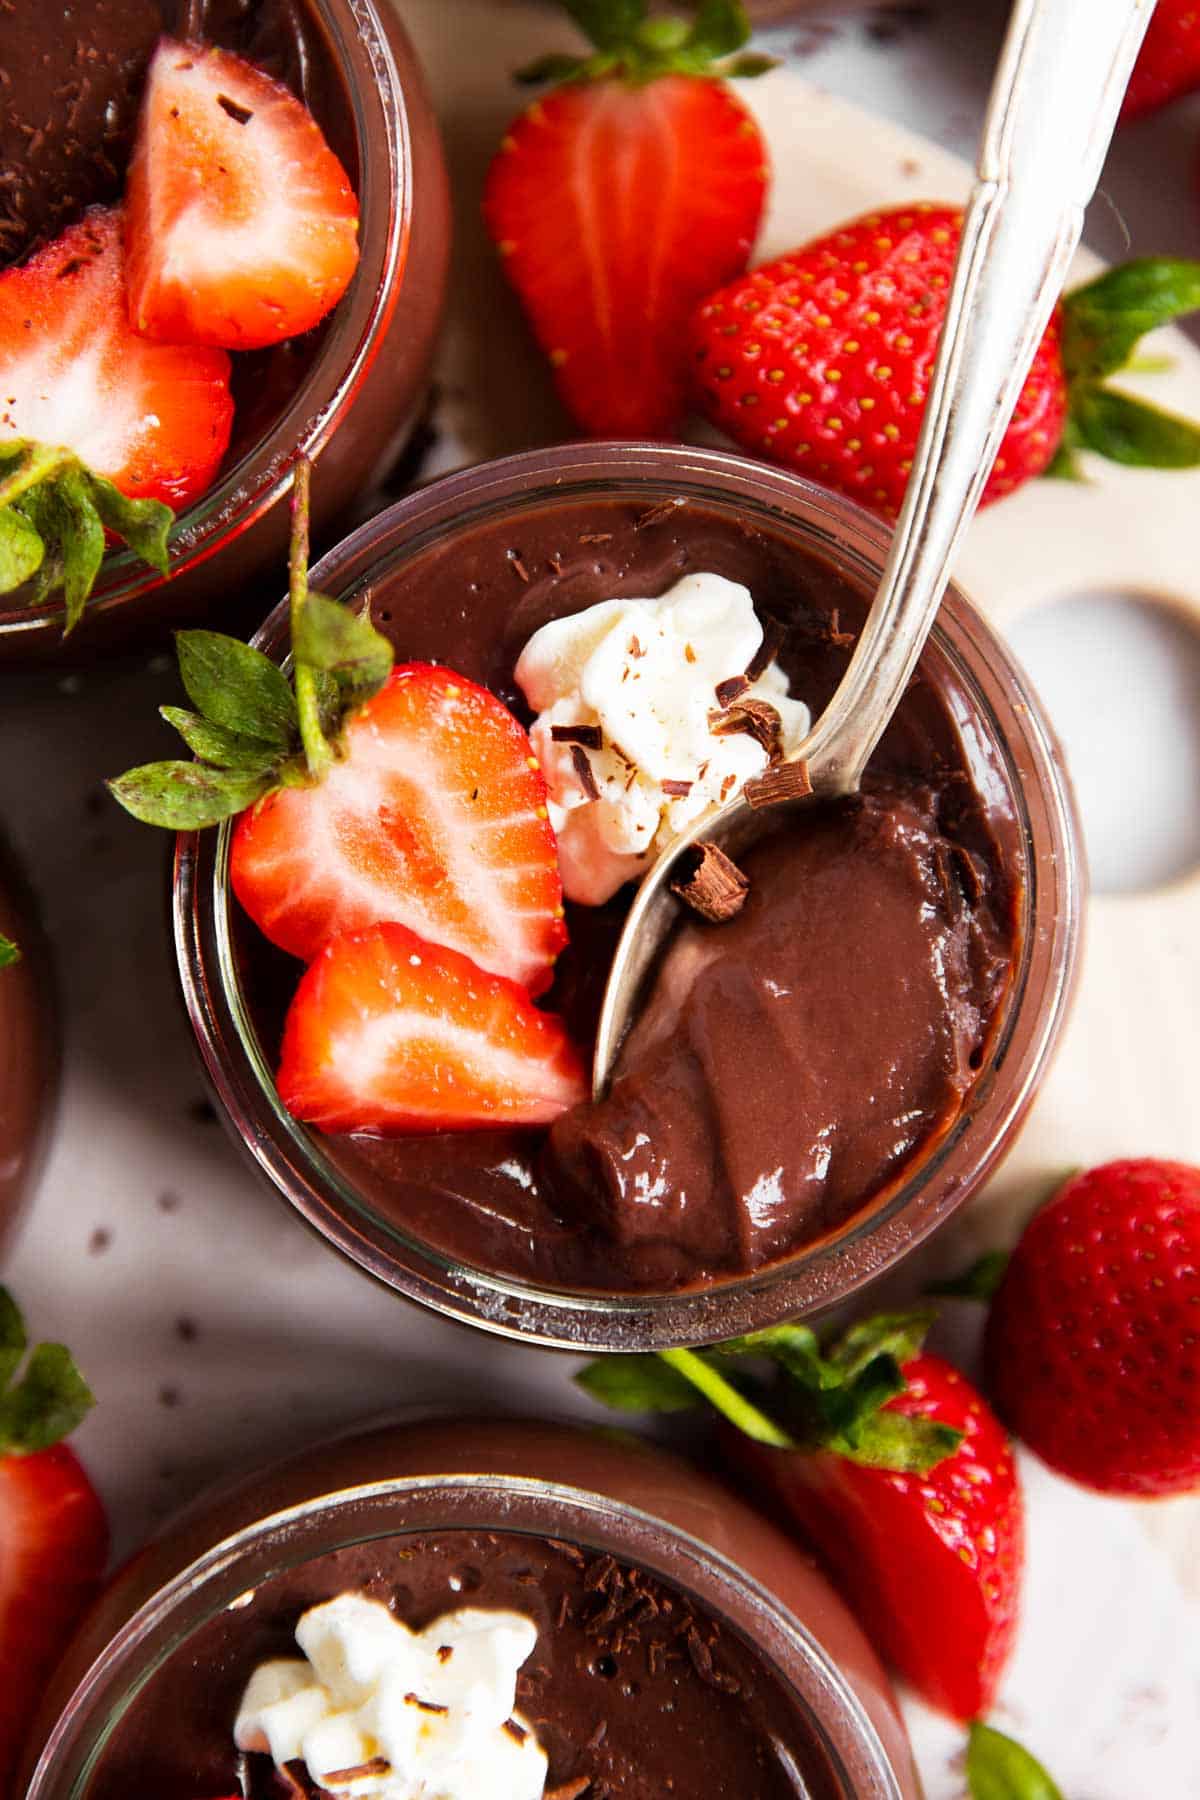 overhead view of chocolate pudding in glass cup with strawberries and whipped cream, with spoon stuck inside